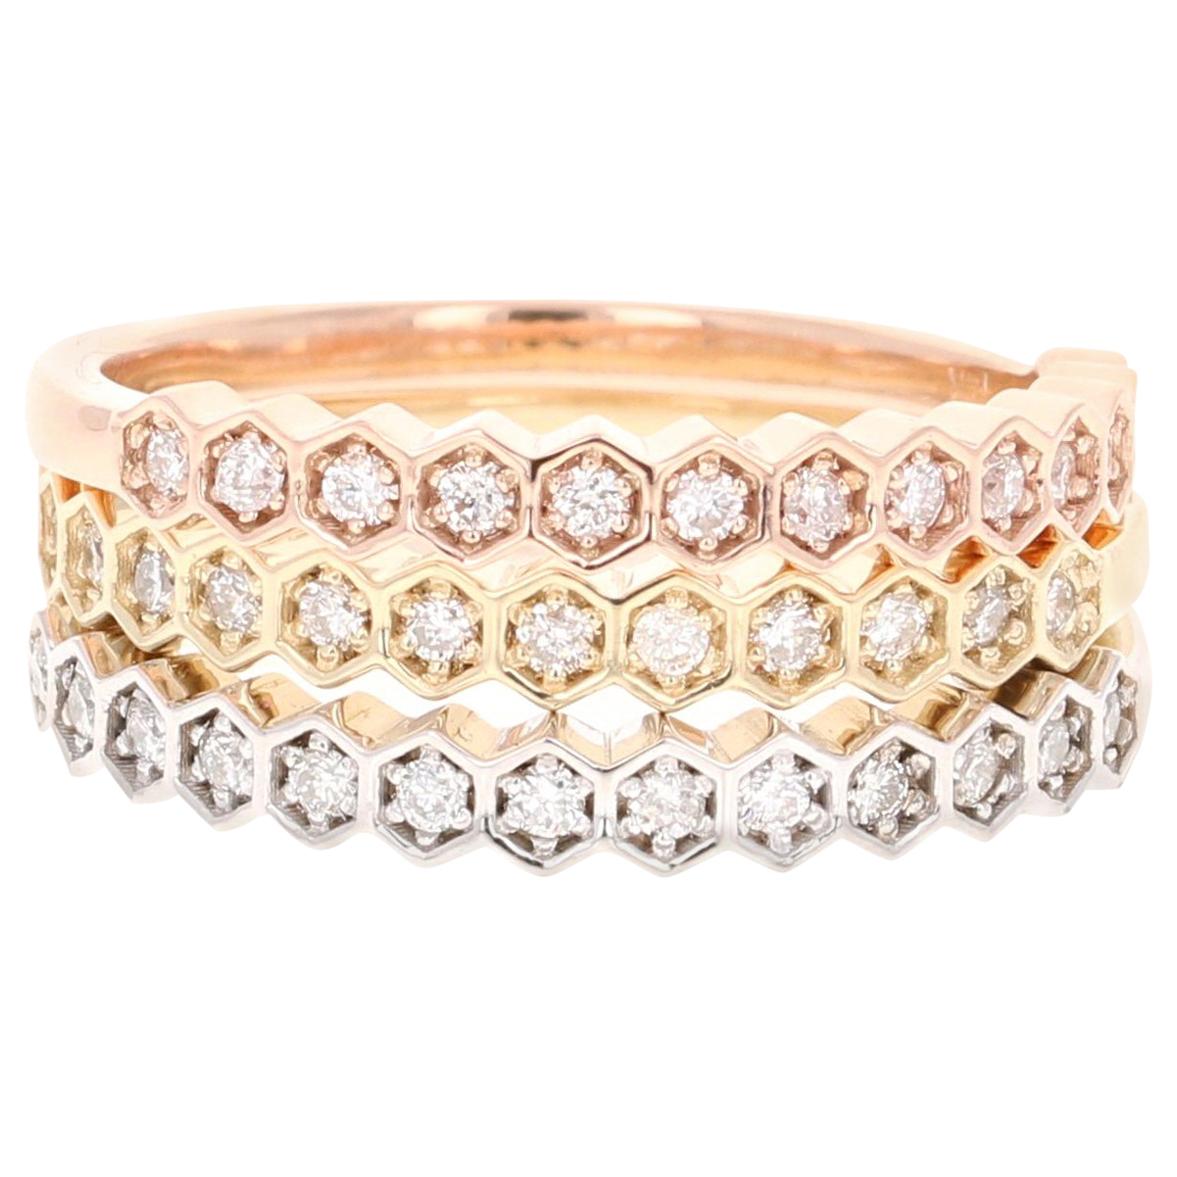 0.47 Carat Round Cut Diamond White, Rose, Yellow Gold Stackable Bands